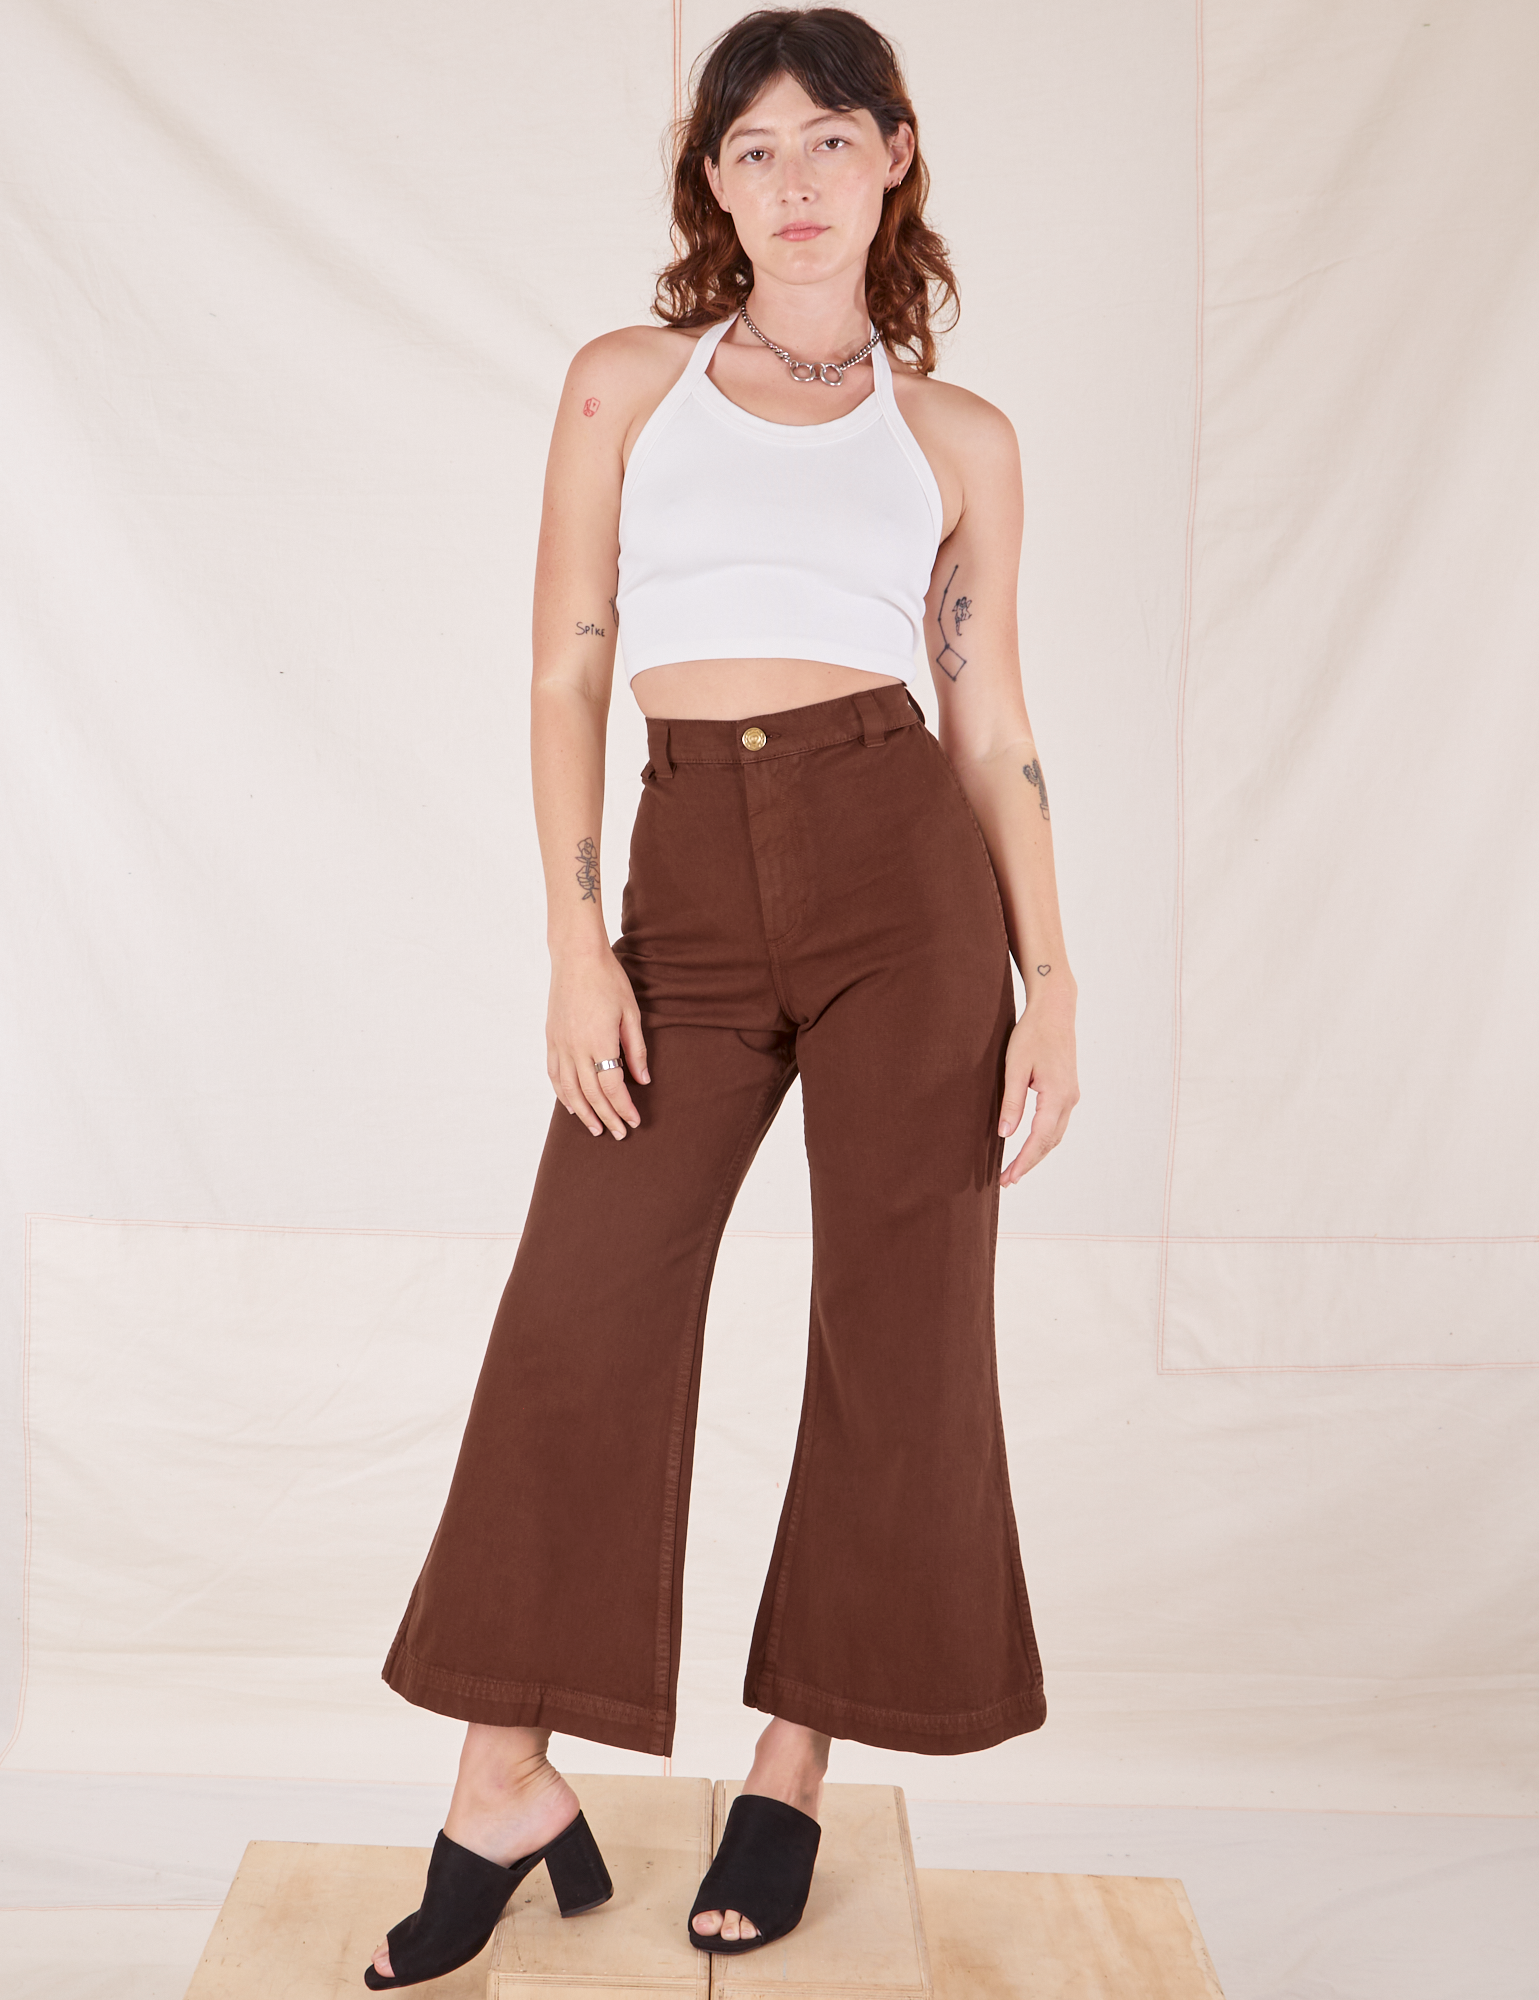 Alex is 5&#39;8&quot; and wearing XXS Bell Bottoms in Fudgesicle Brown paired with vintage off-white Halter Top